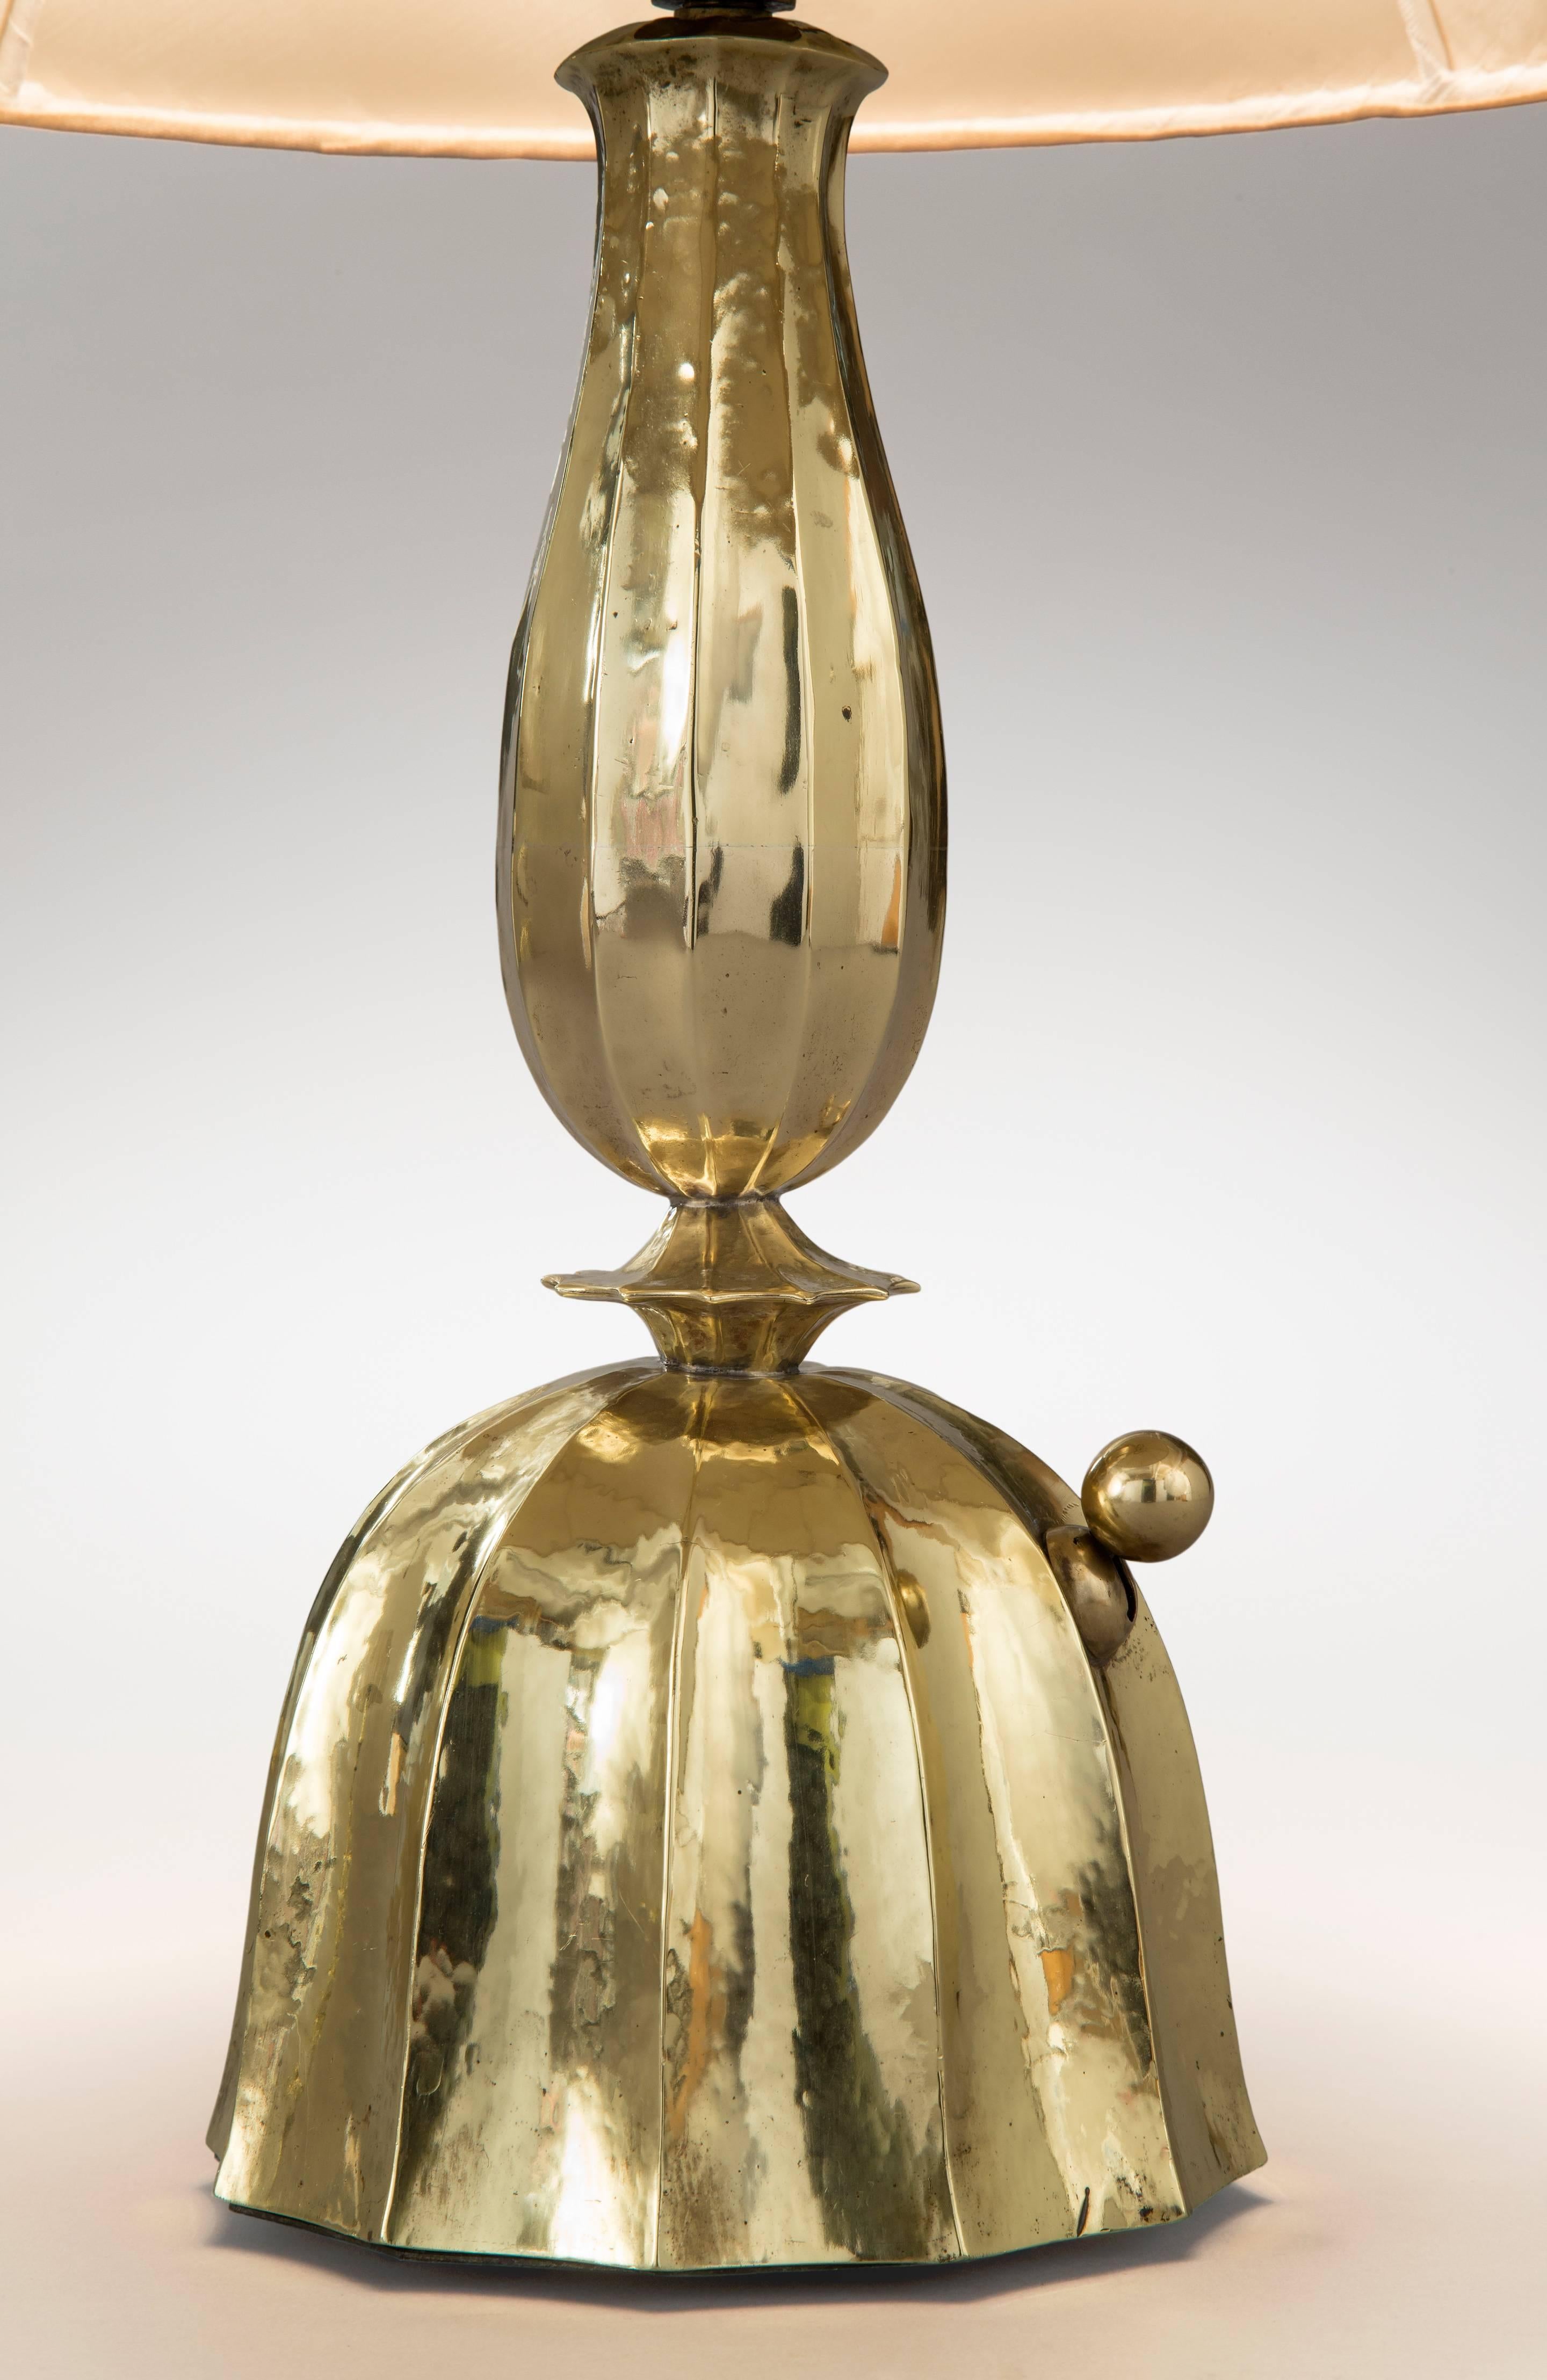 Josef Hoffmann for the Wiener Werkestätte, Pair of Hammered Brass Table Lamps, Vienna Secession 
A very hard to find pair of museum quality lamps by the founder of the Wiener Werkstätte. The baluster-shaped standard, above a pinched waist centering